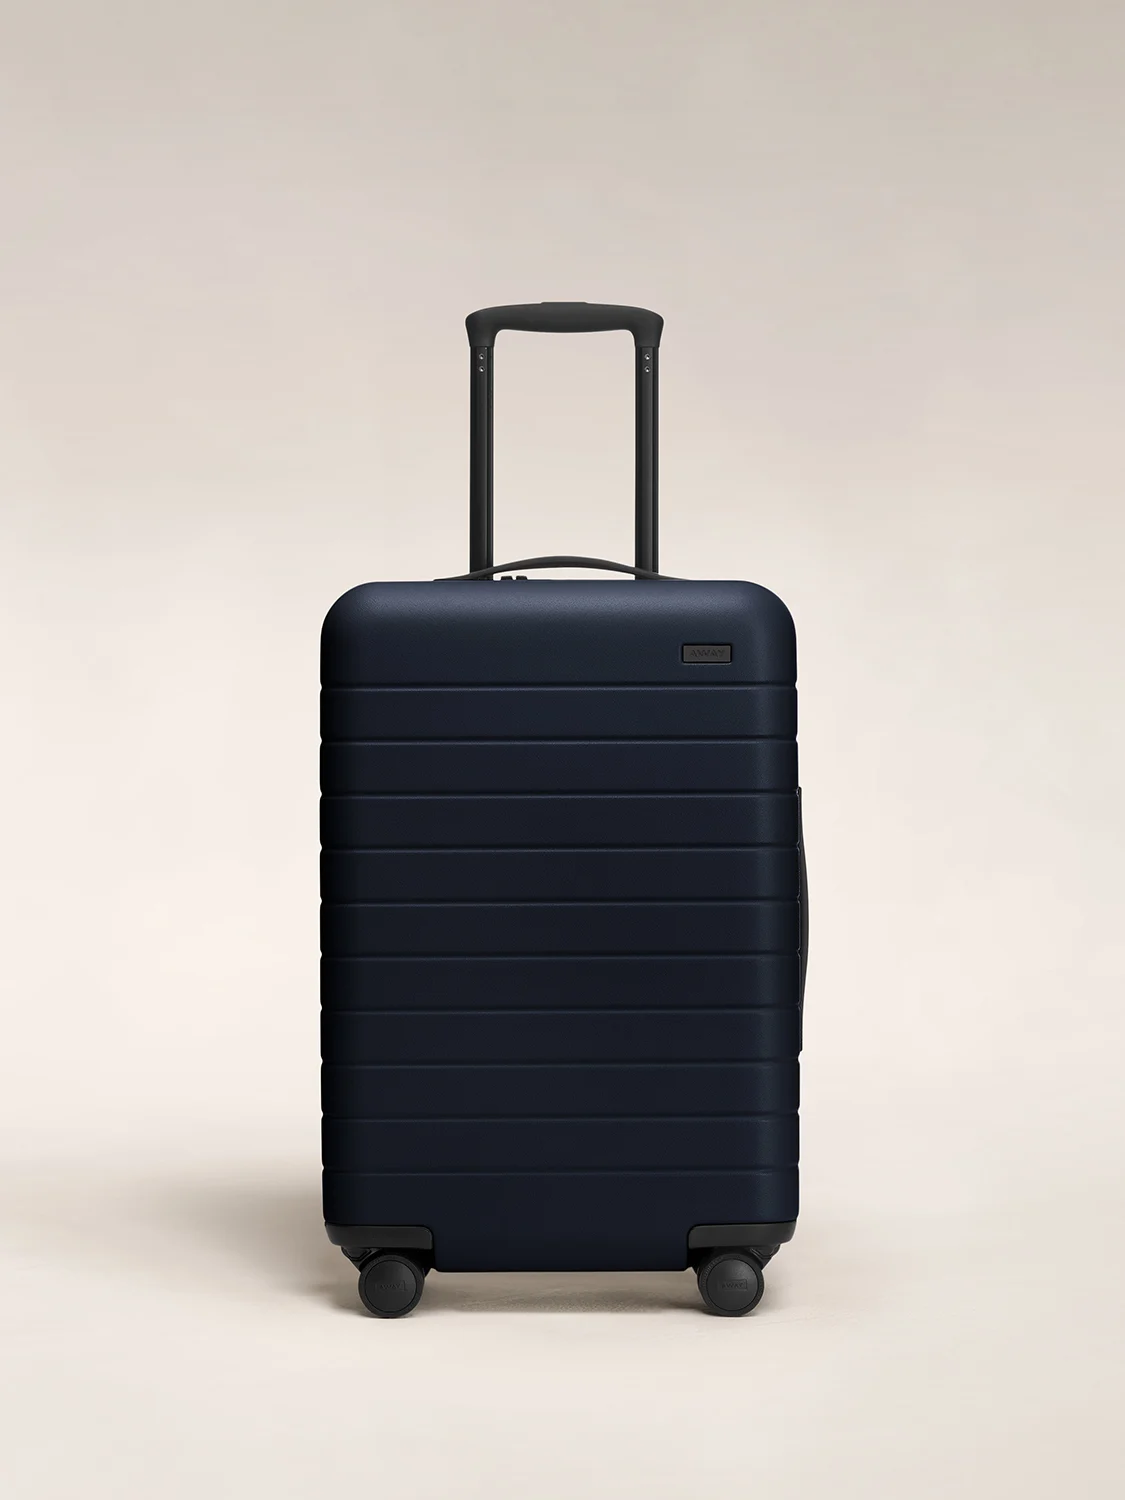 The hardside Bigger Carry-On suitcase in Navy